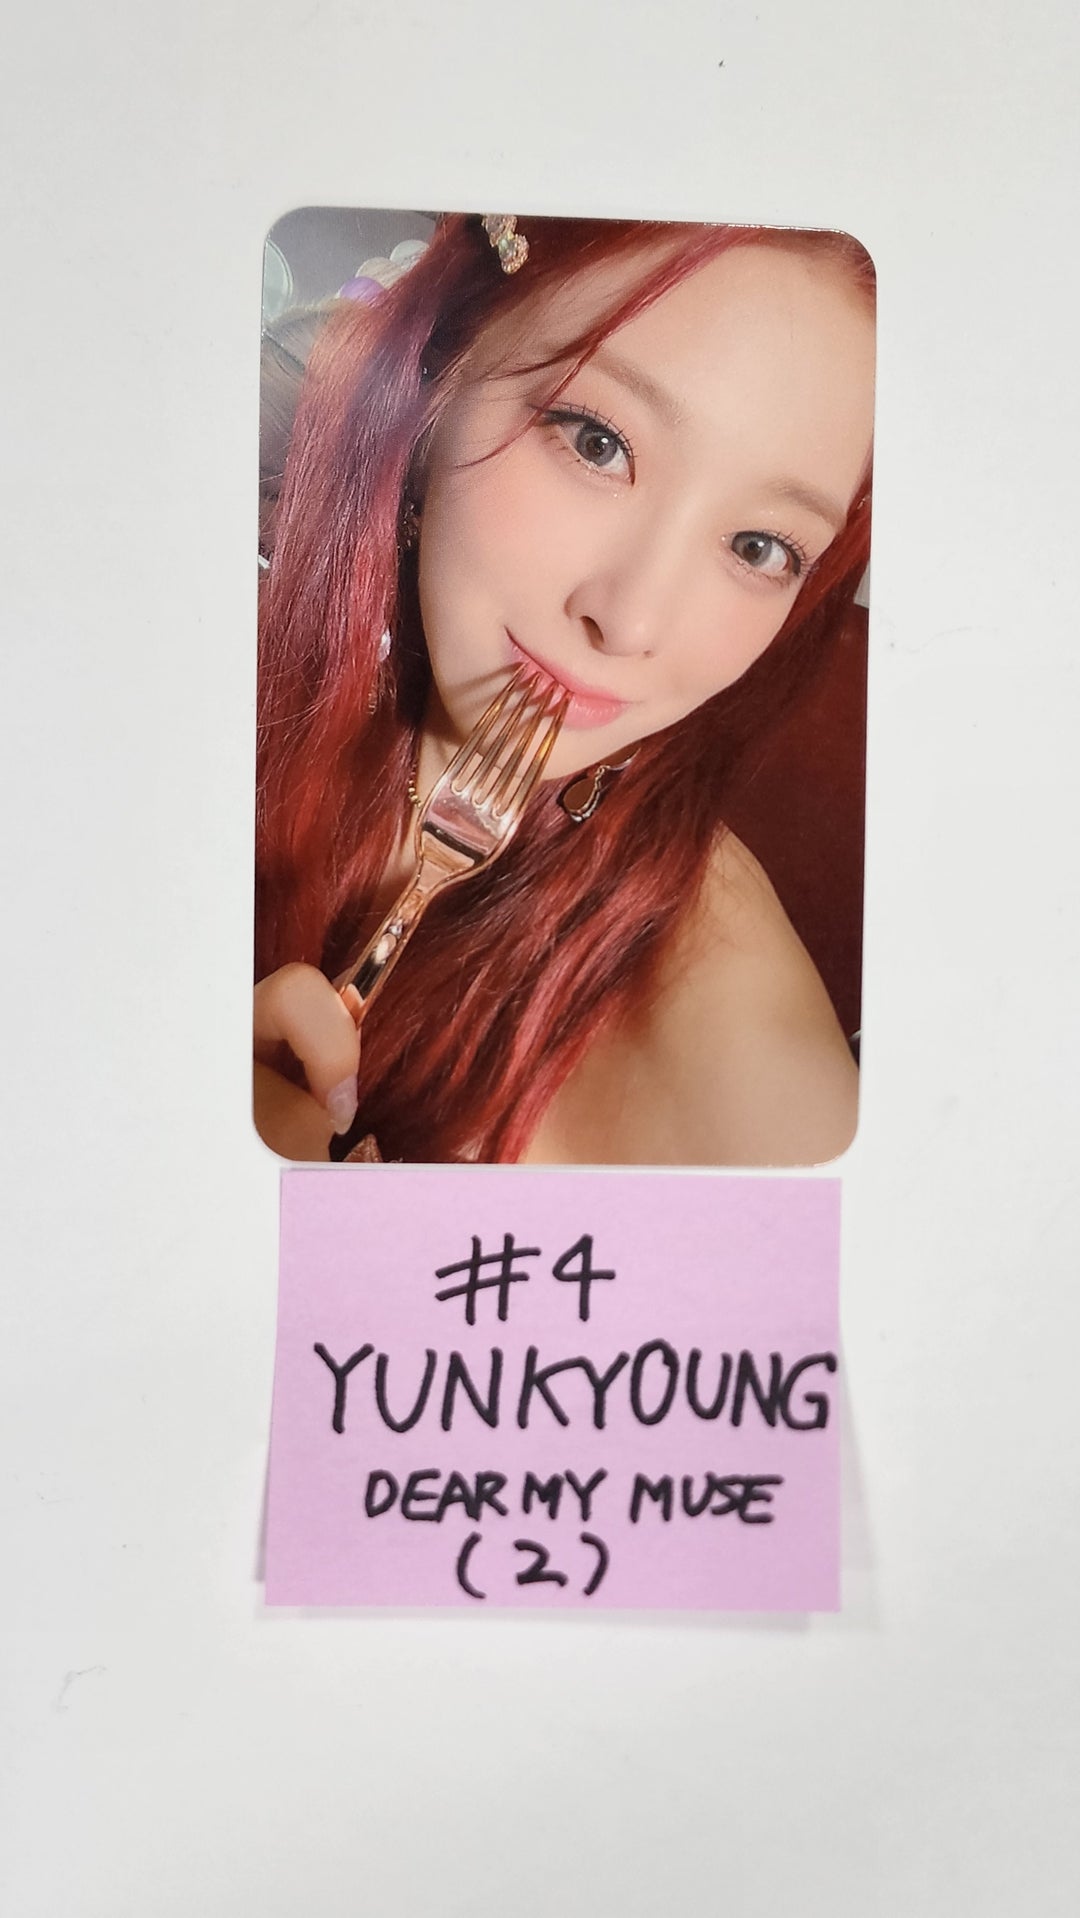 Rocket Punch 'FLASH' - Dear My Muse Pre-Order Benefit Photocard